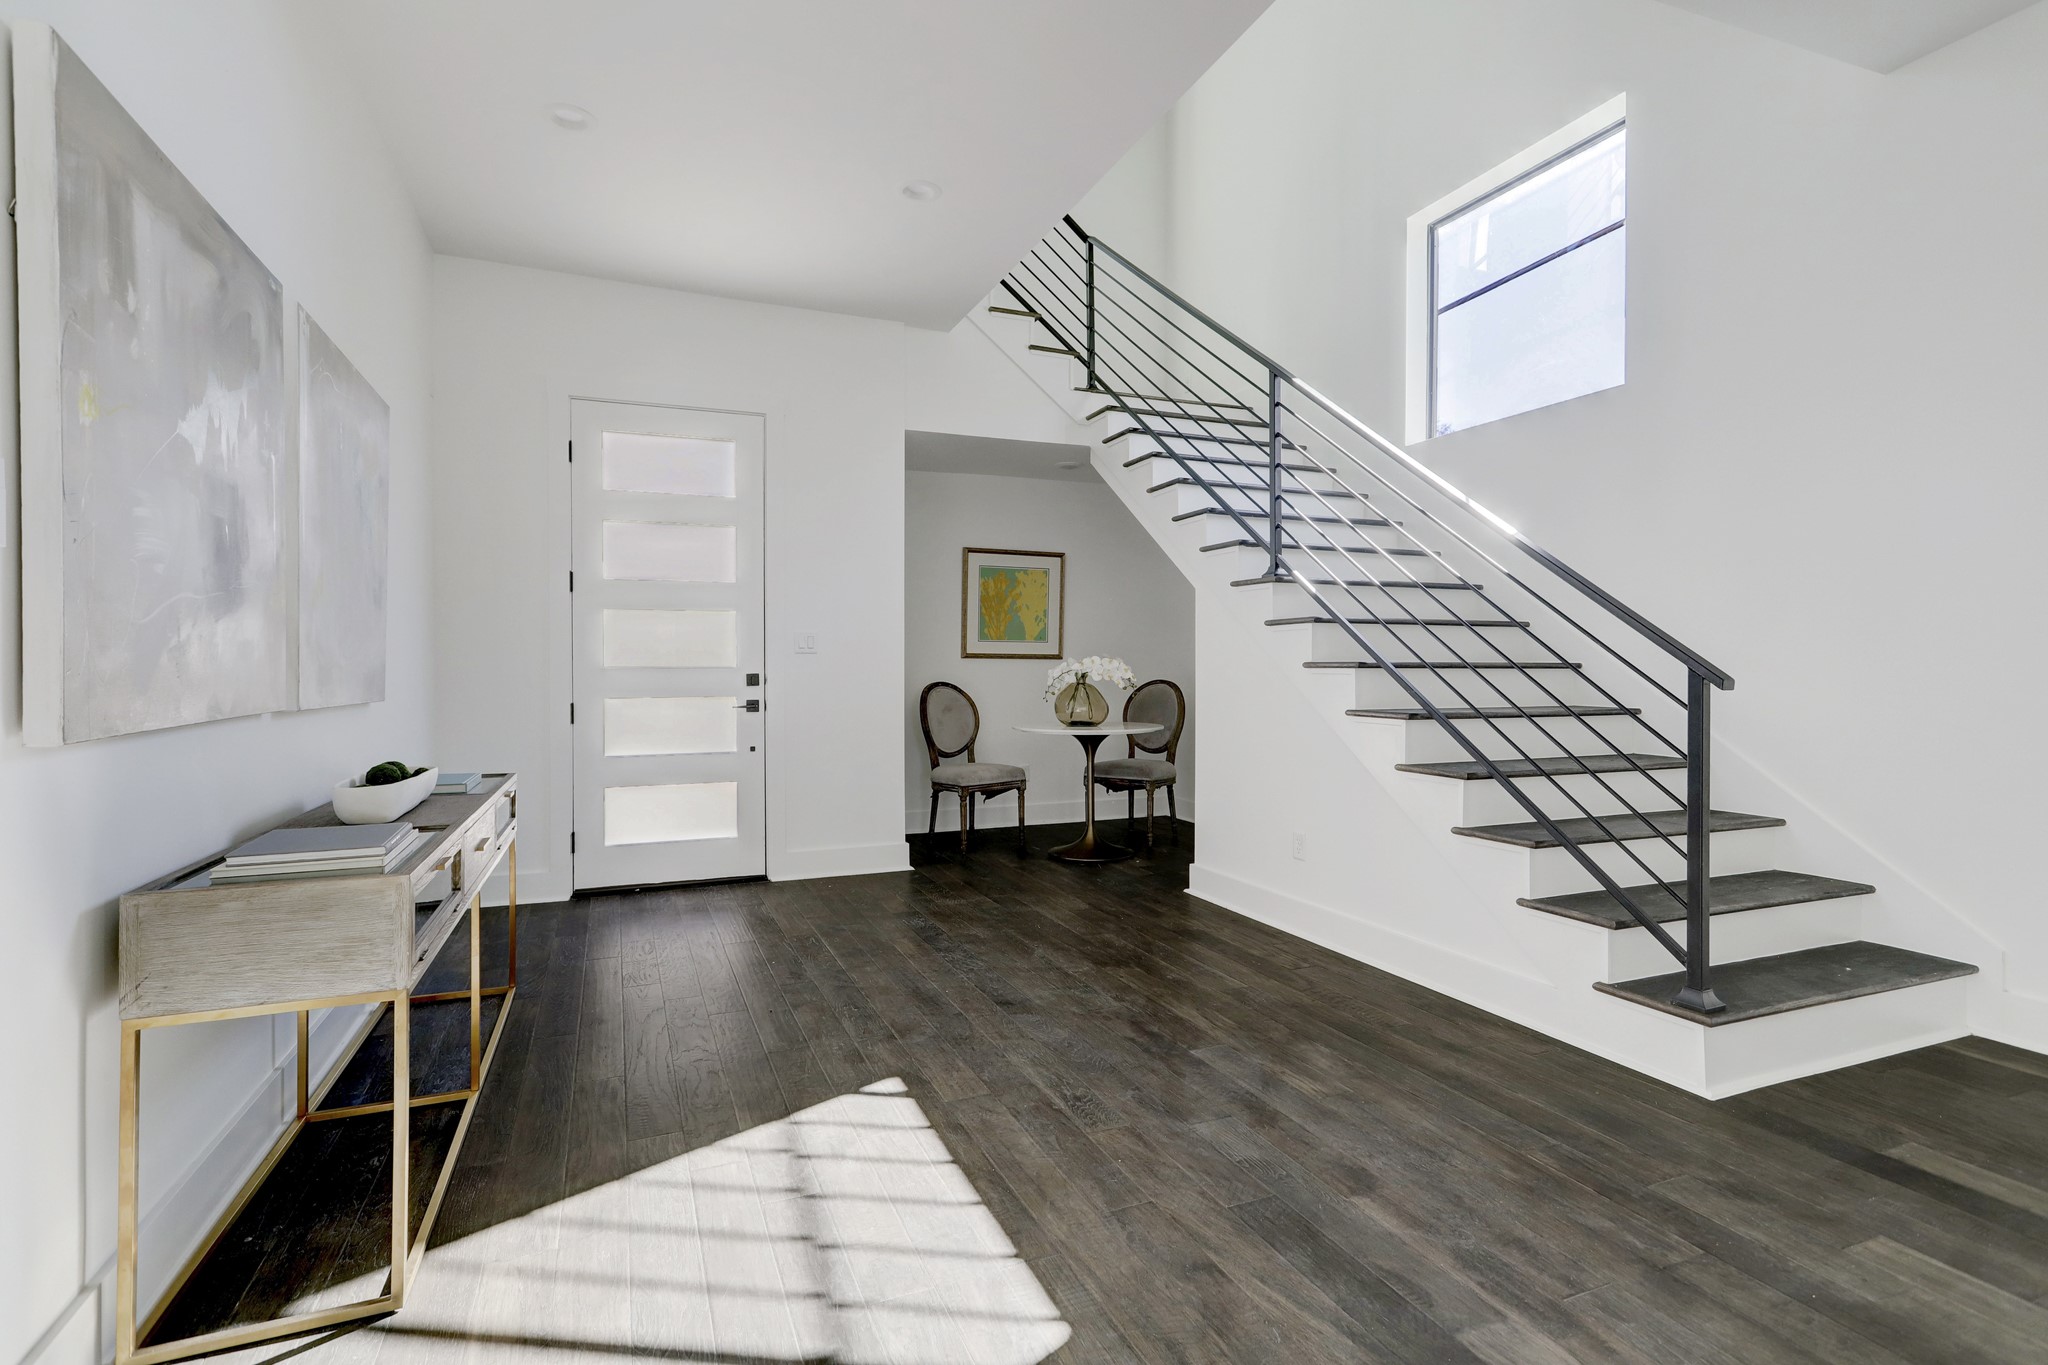 A large entry with wood floors welcomes you to the home.